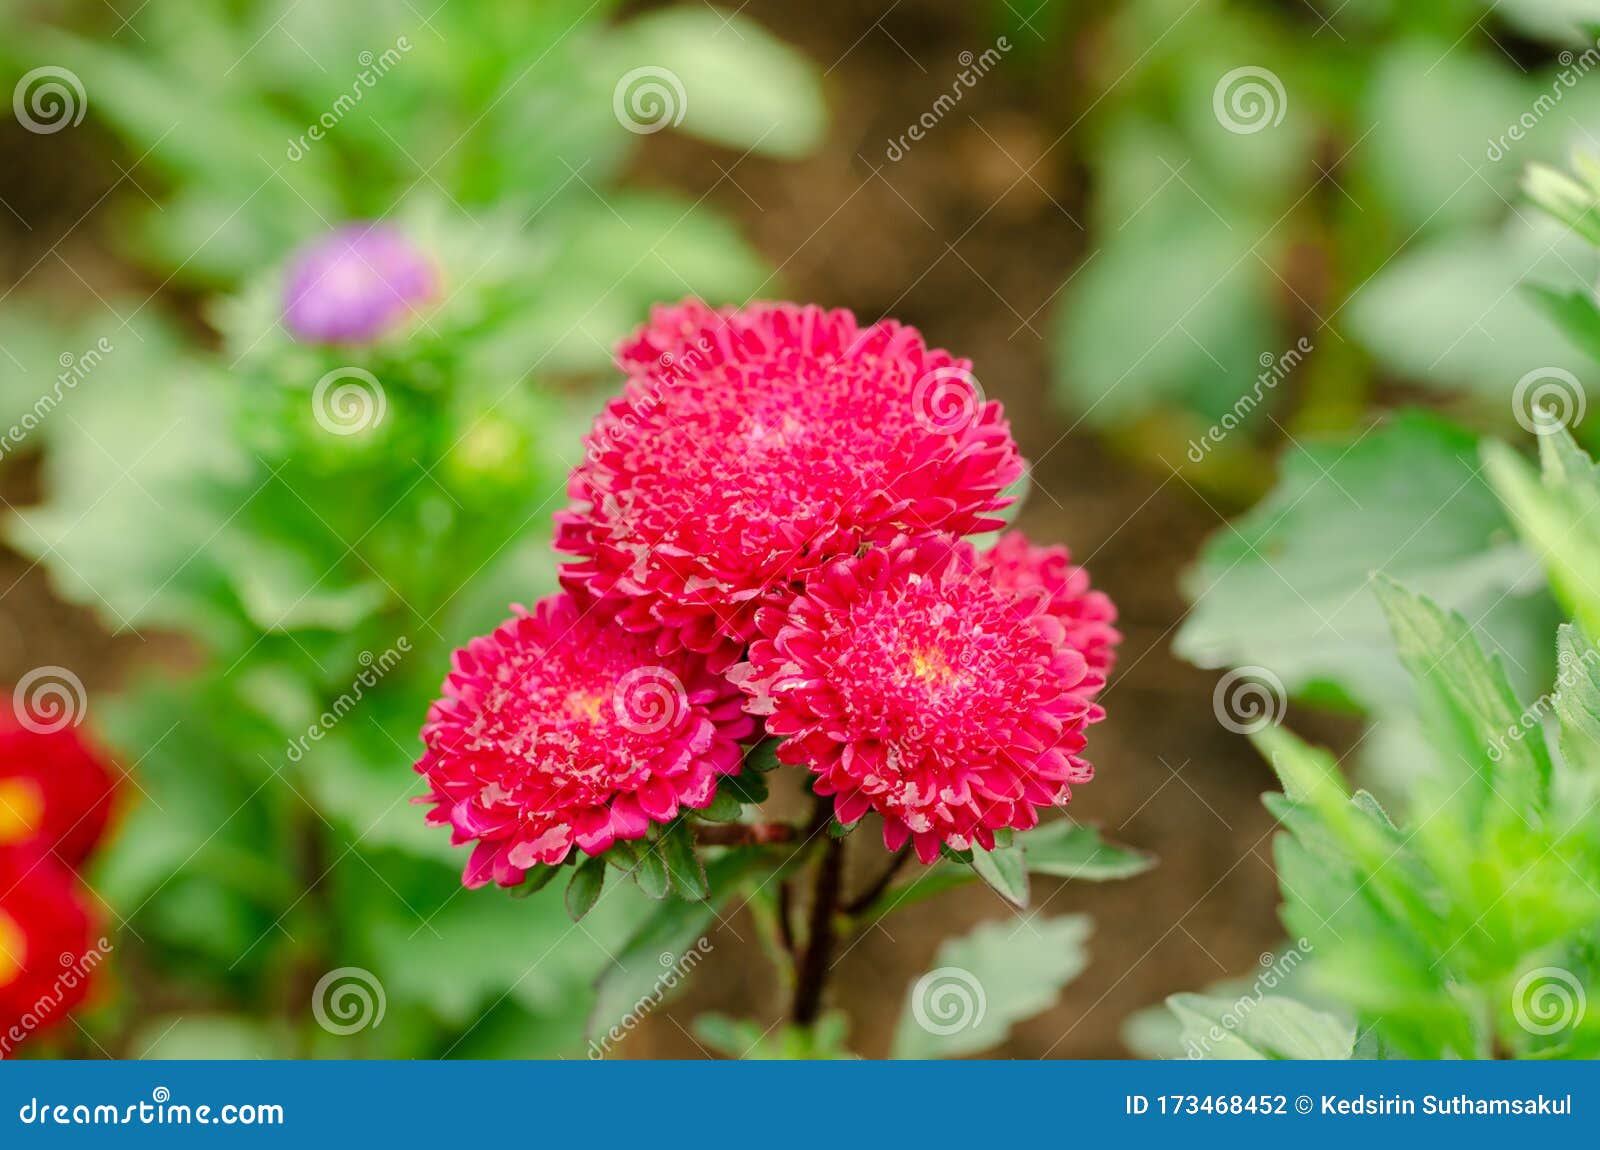 Red Aster Flower In The Garden Stock Photo Image Of China Bouquet 173468452